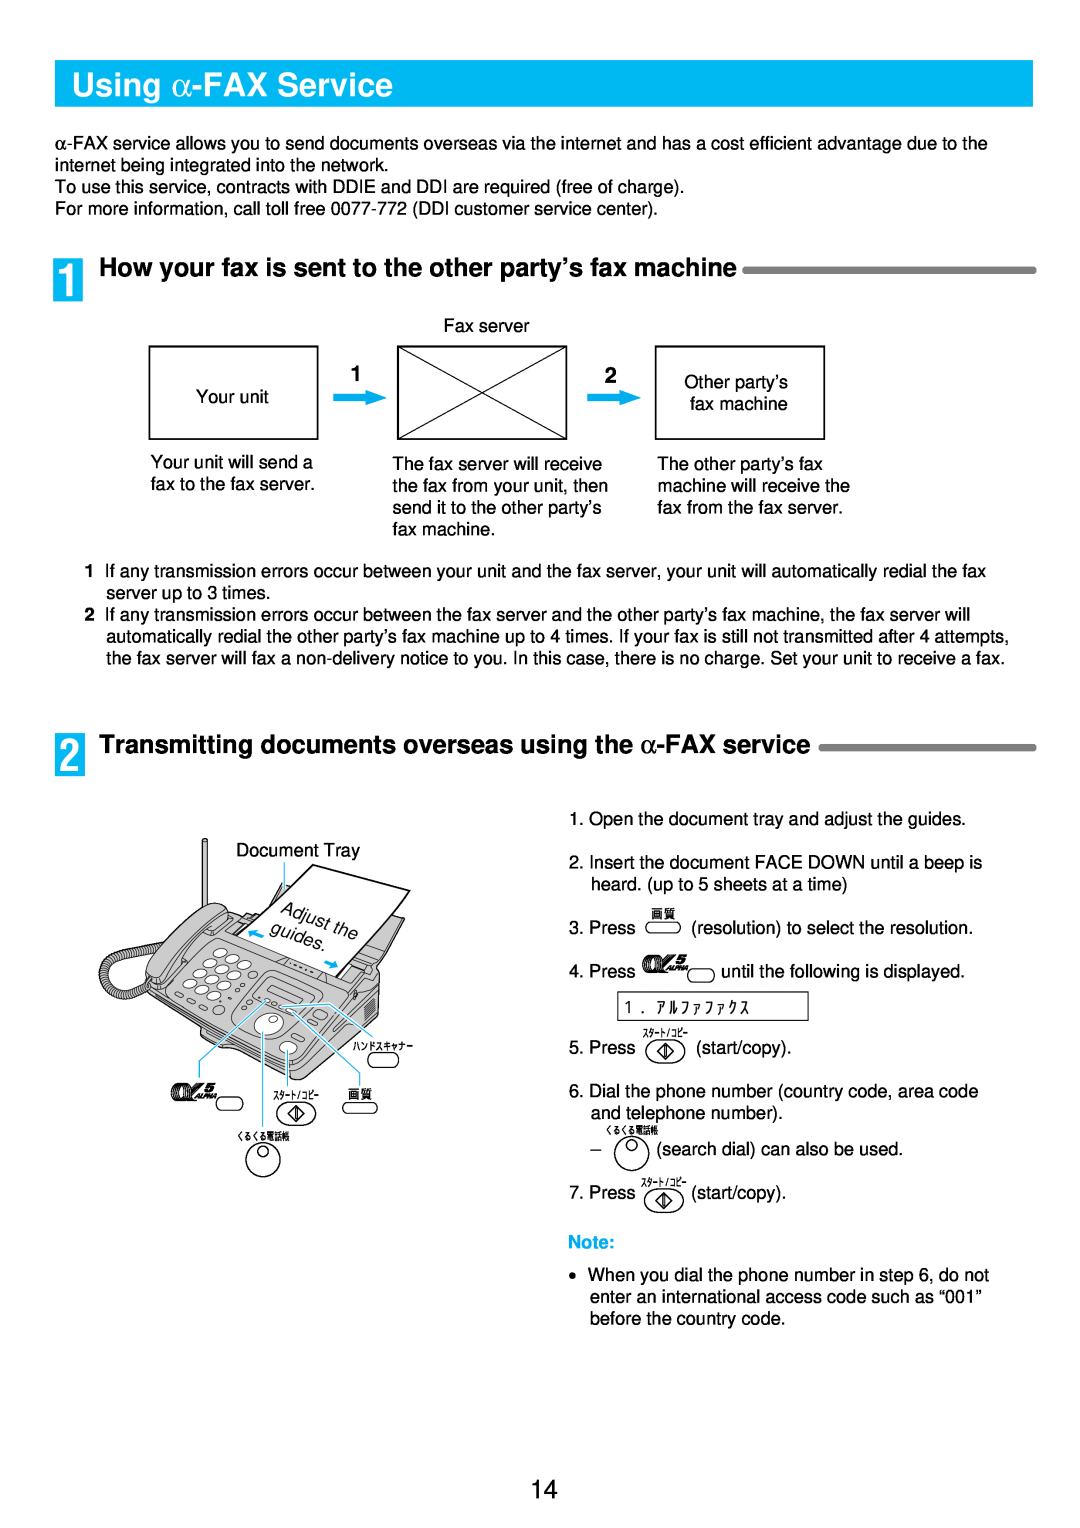 Panasonic KX-PW11CLK, KX-PW21CL Using α-FAX Service, How your fax is sent to the other party’s fax machine, Adjust, guides 